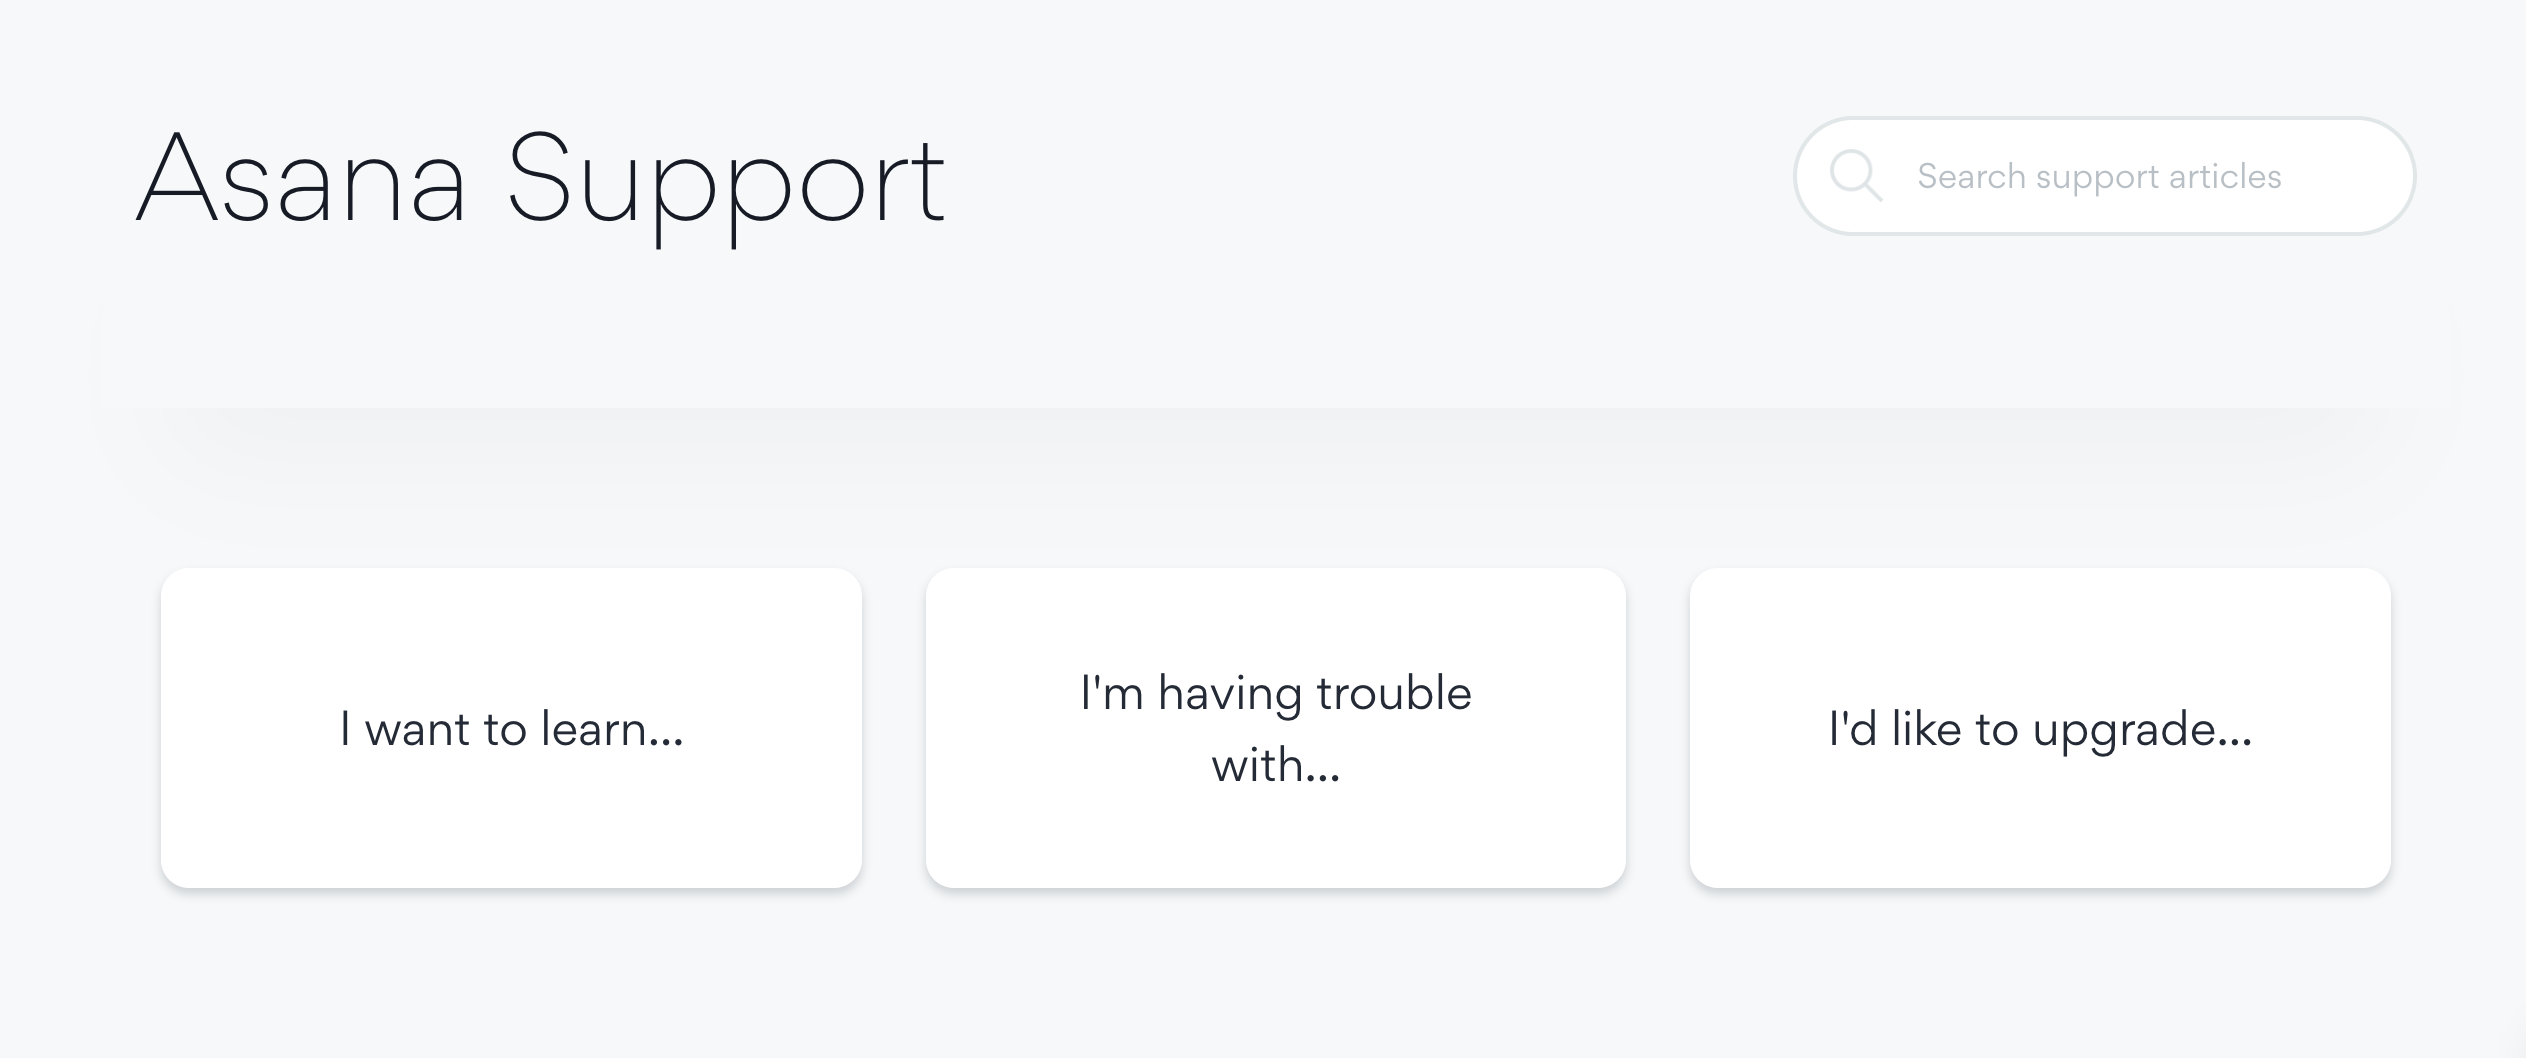 Asana support page